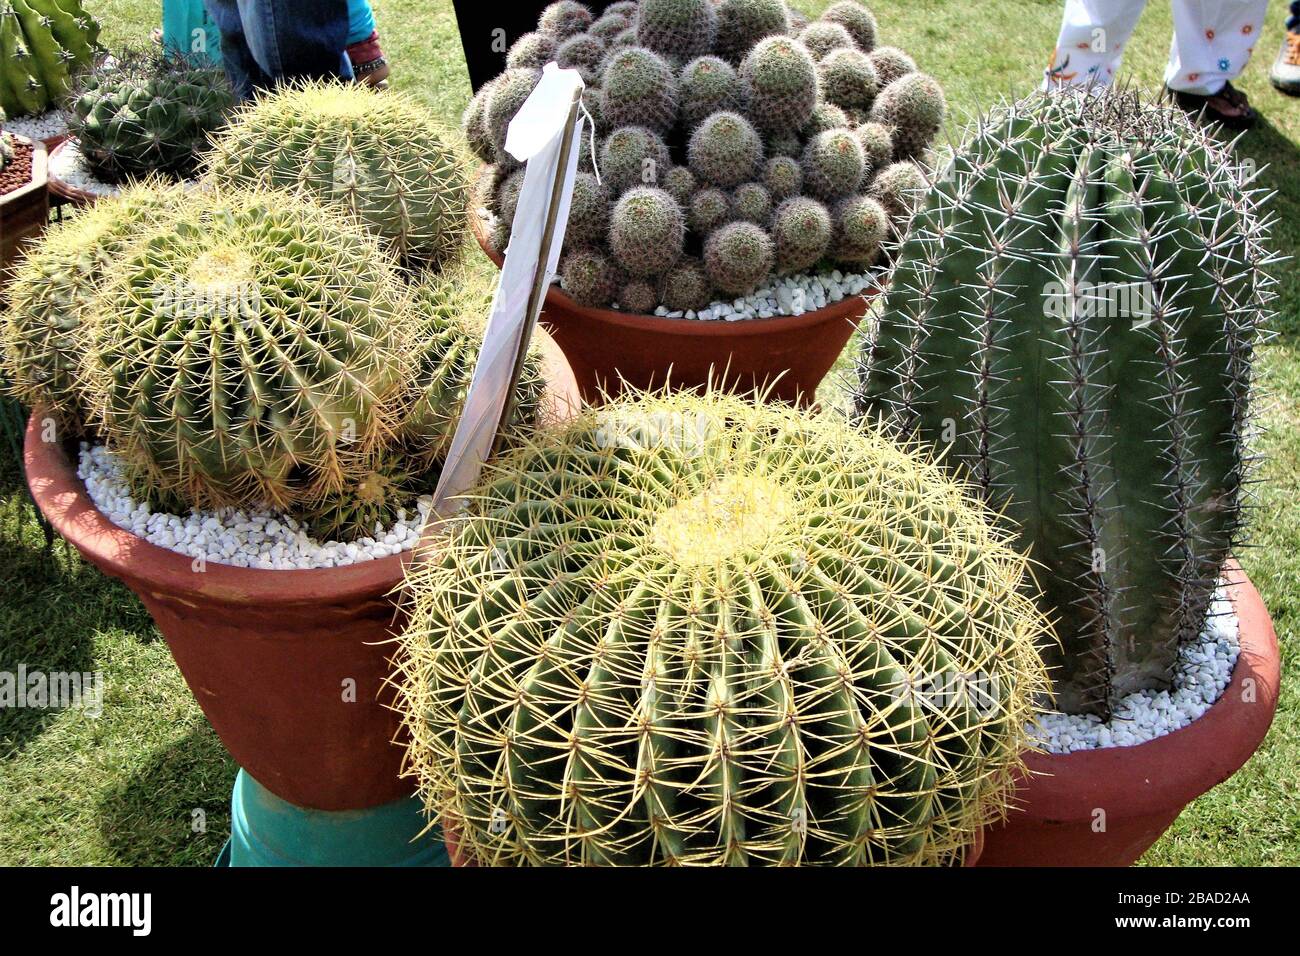 Group of amazing spherical and cylindrical cactus on display at flower show, India Stock Photo